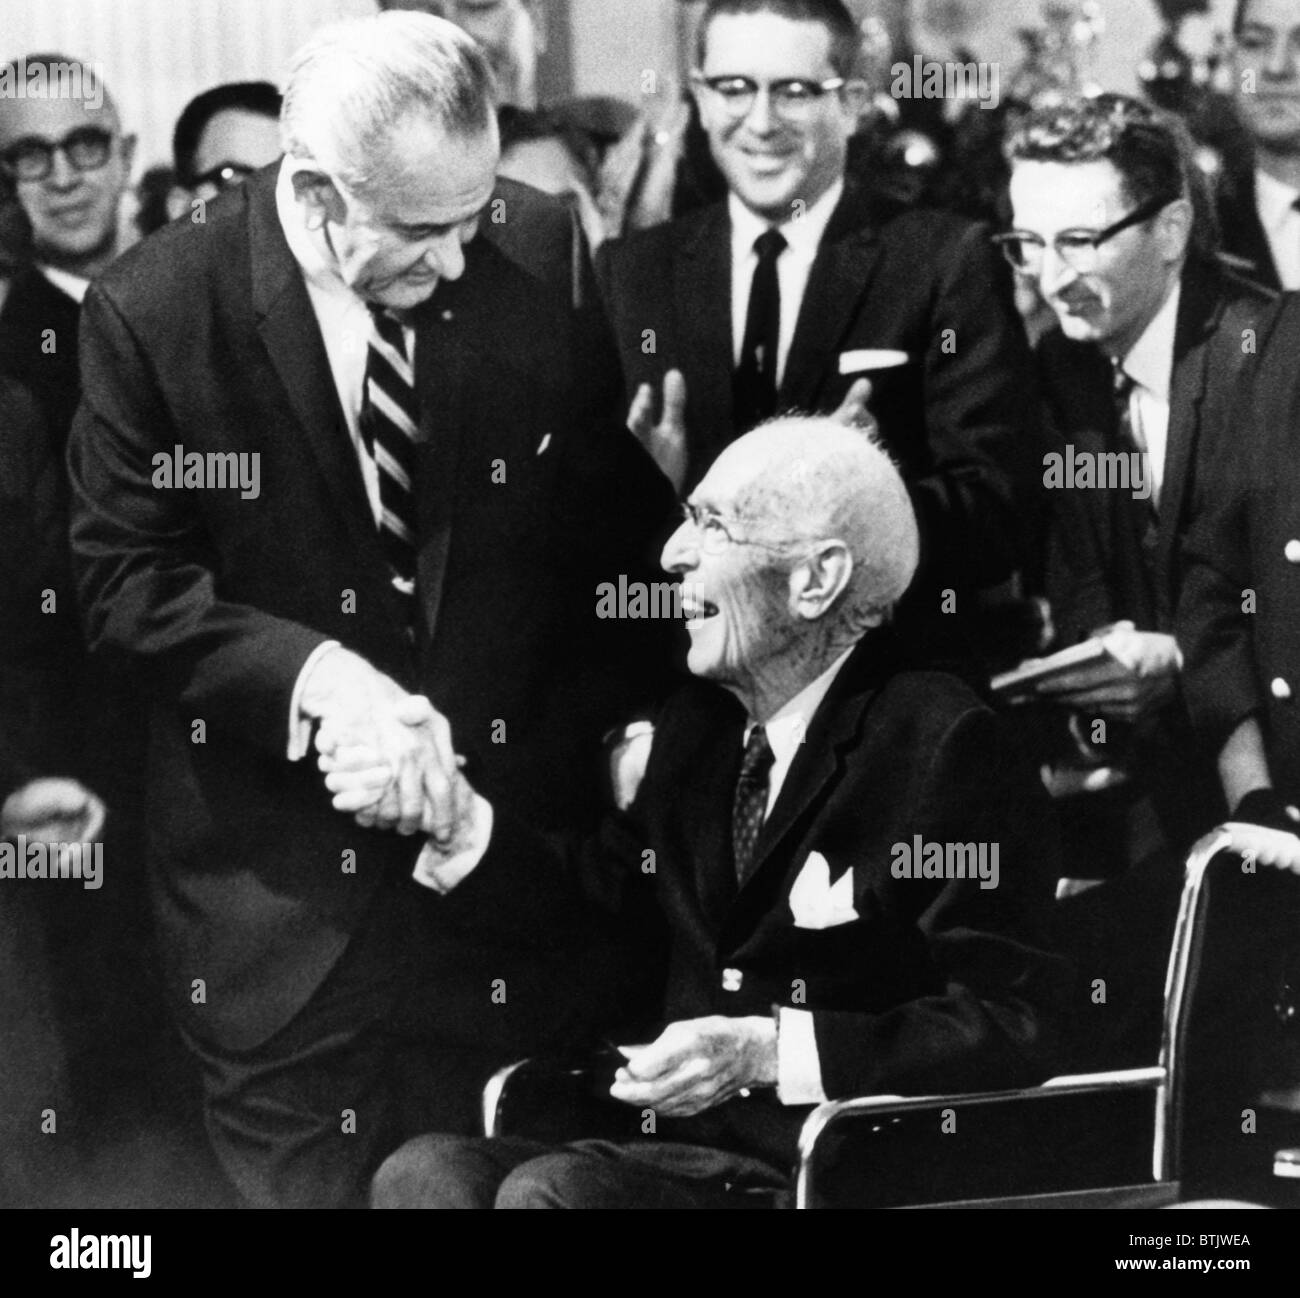 Foreground: President Lyndon Johnson (left), shaking hands with writer Upton Sinclair, (who wrote 'The Jungle', a criticism of t Stock Photo